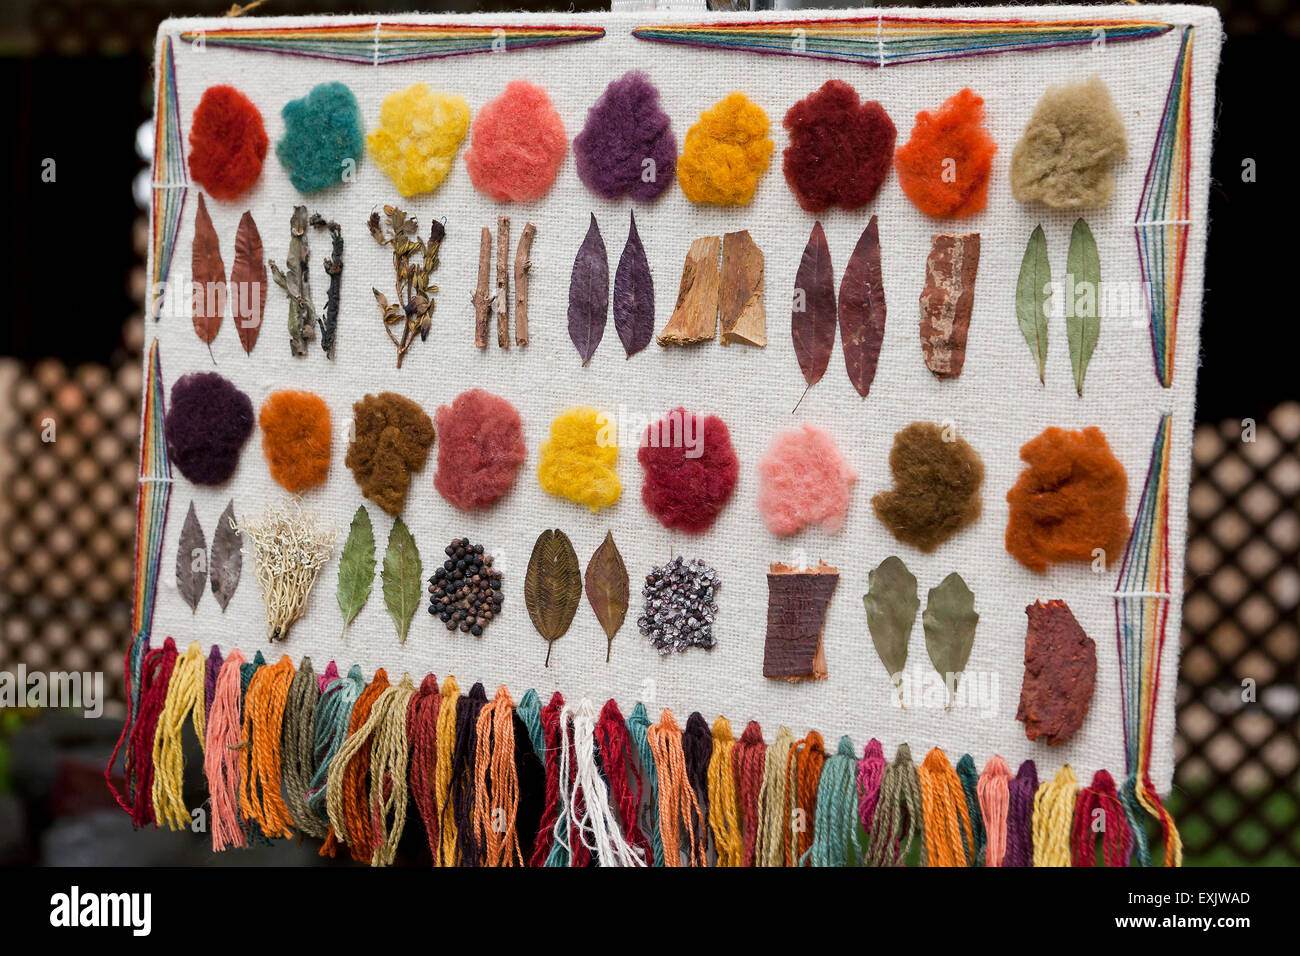 Multi-colored yarns displayed with plant samples from which the color dyes are derived Stock Photo